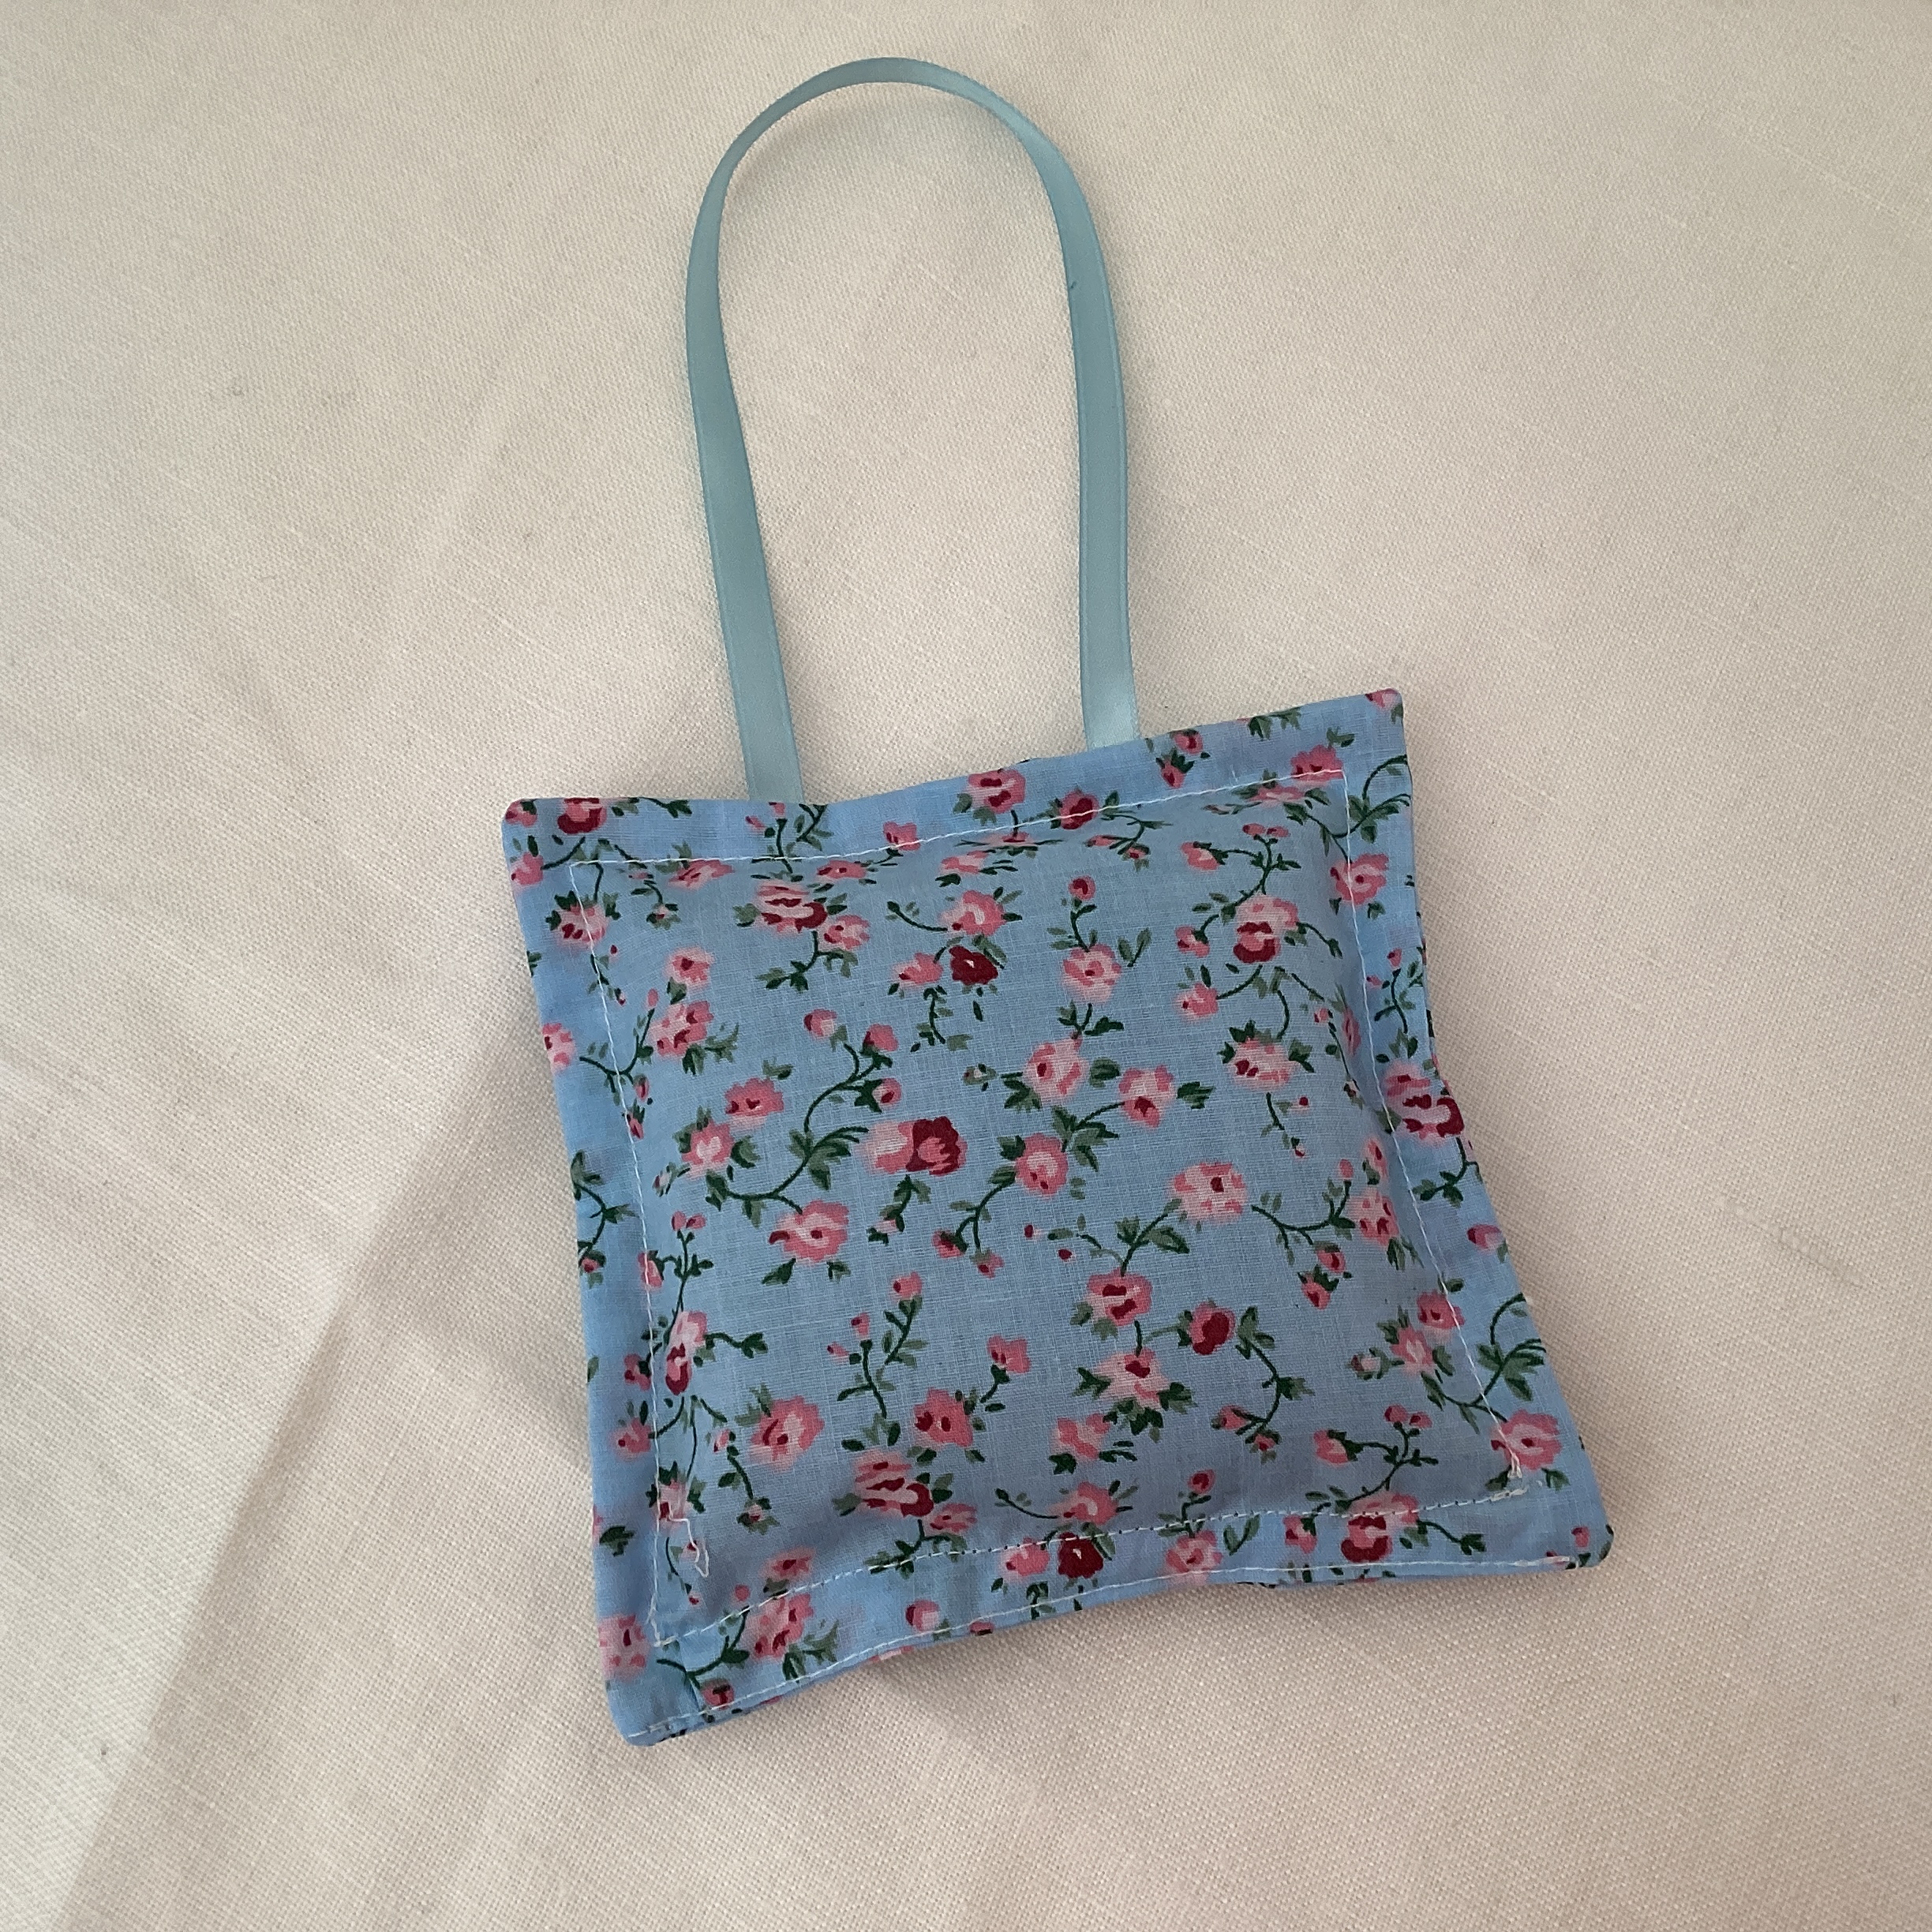 Lavender Bag - blue with ditsy flowers